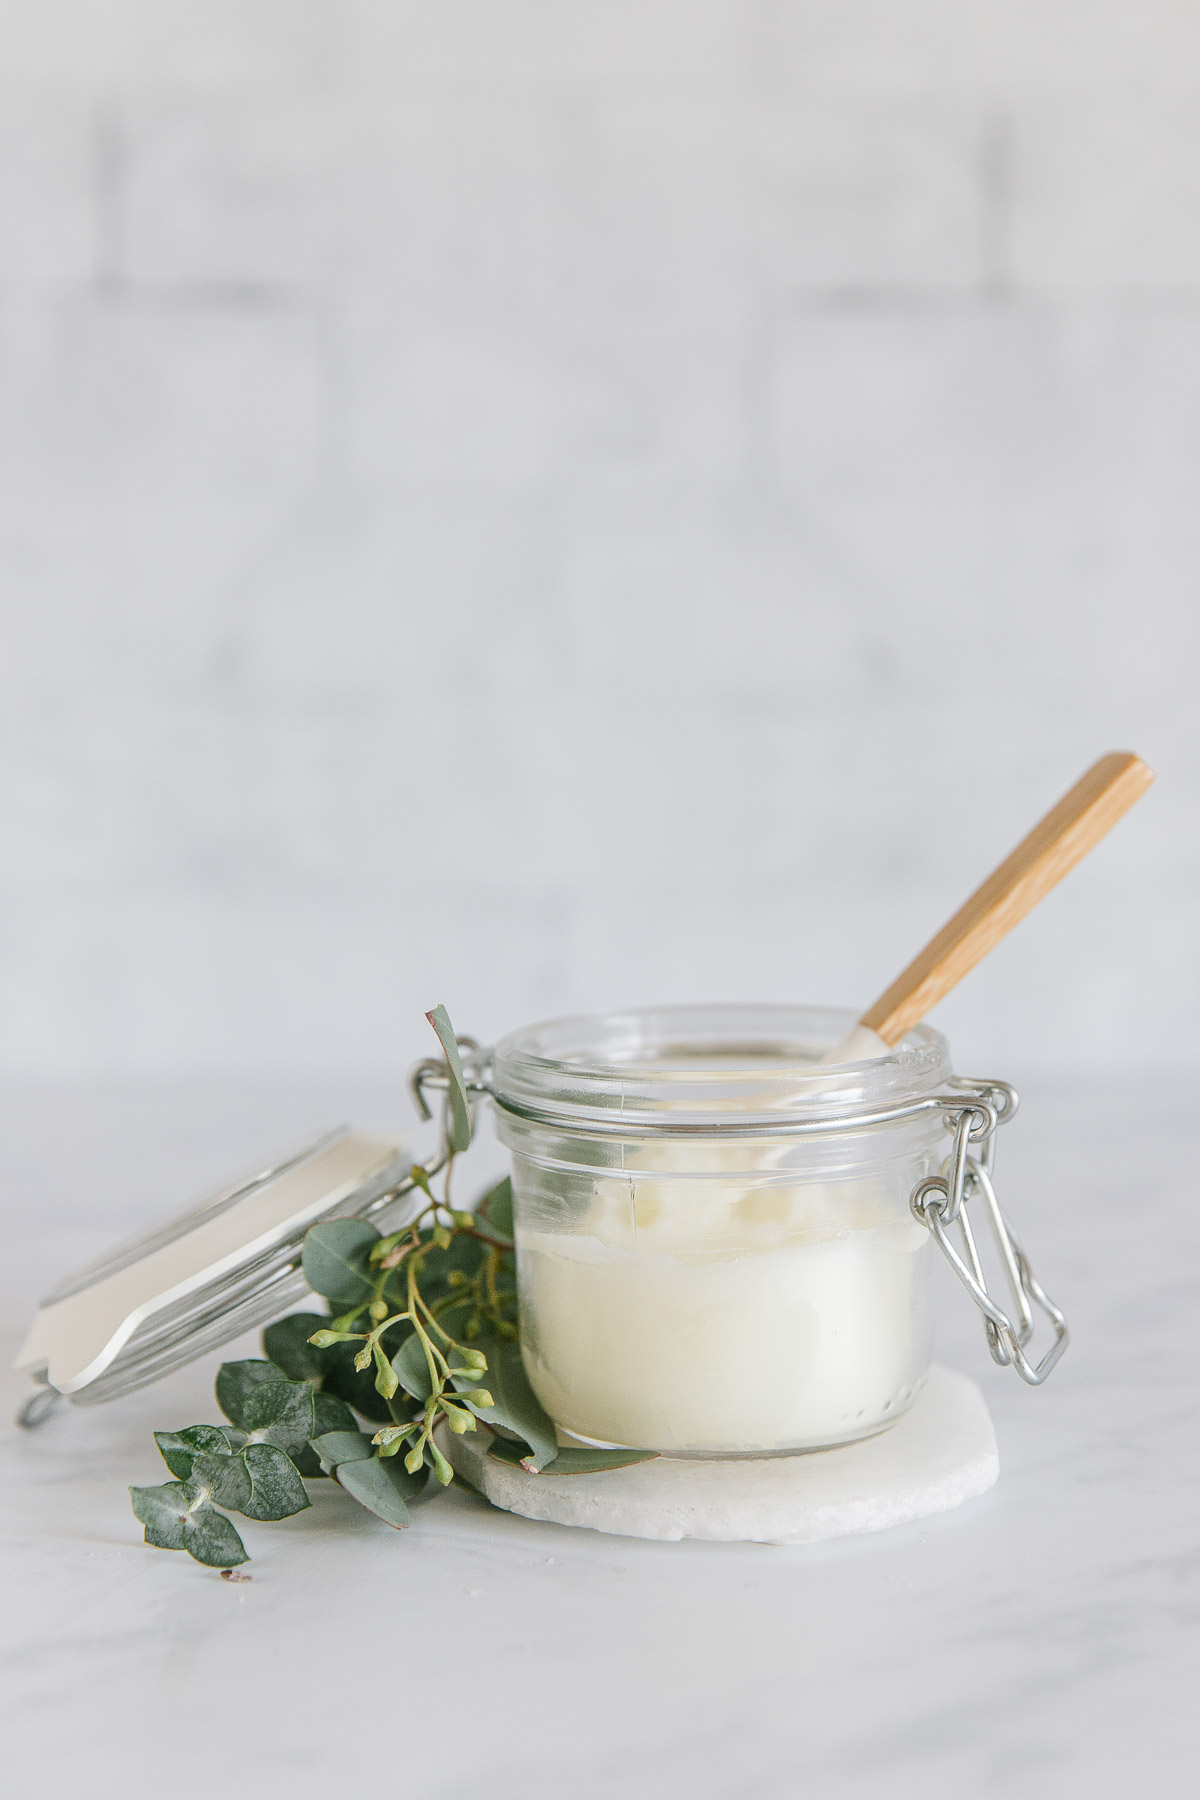 A glass jar with a small spatula with a wooden handle inside of it with a green plant around it on top of a white coaster.